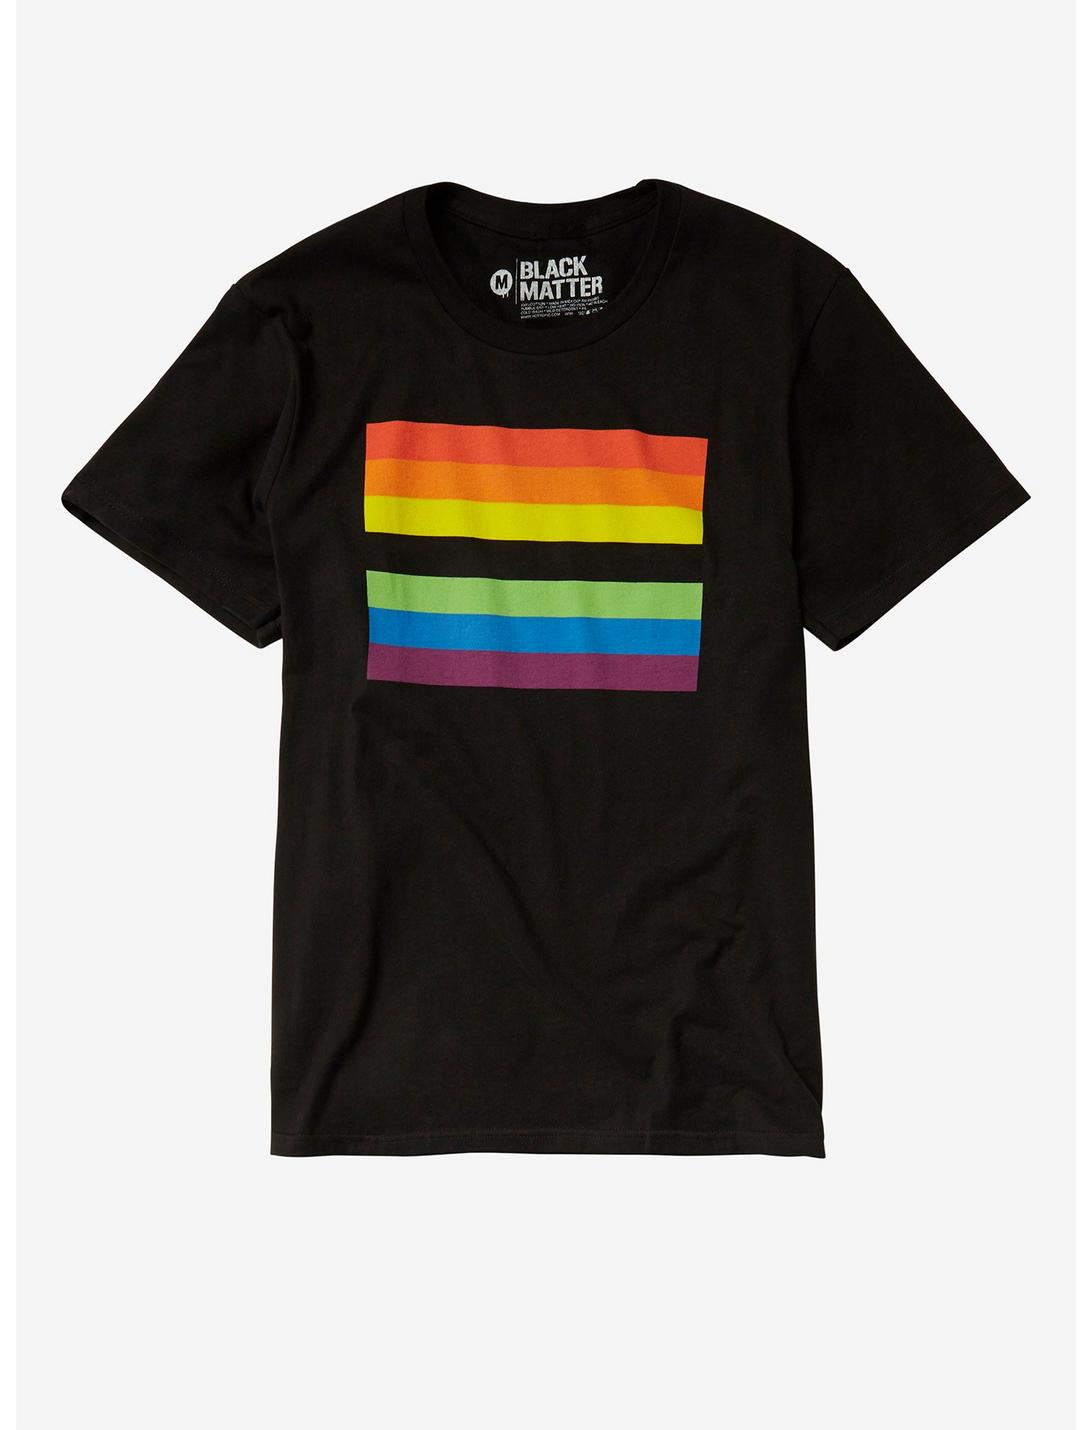 Rainbow Equality Pride T-Shirt | Hot Topic